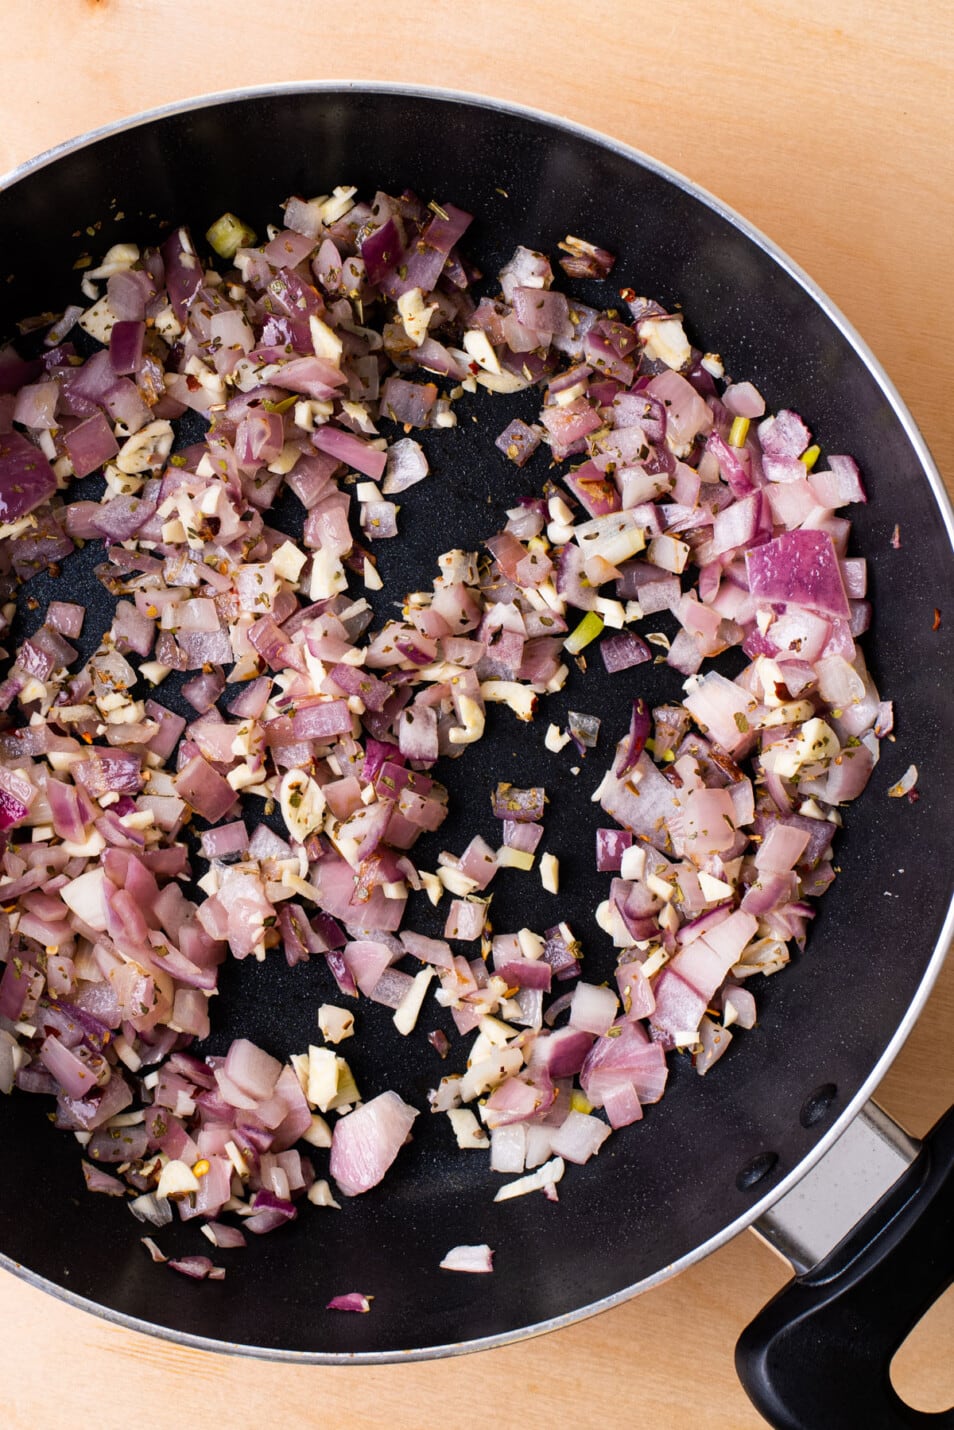 Sauteed red onions and garlic in a pan.